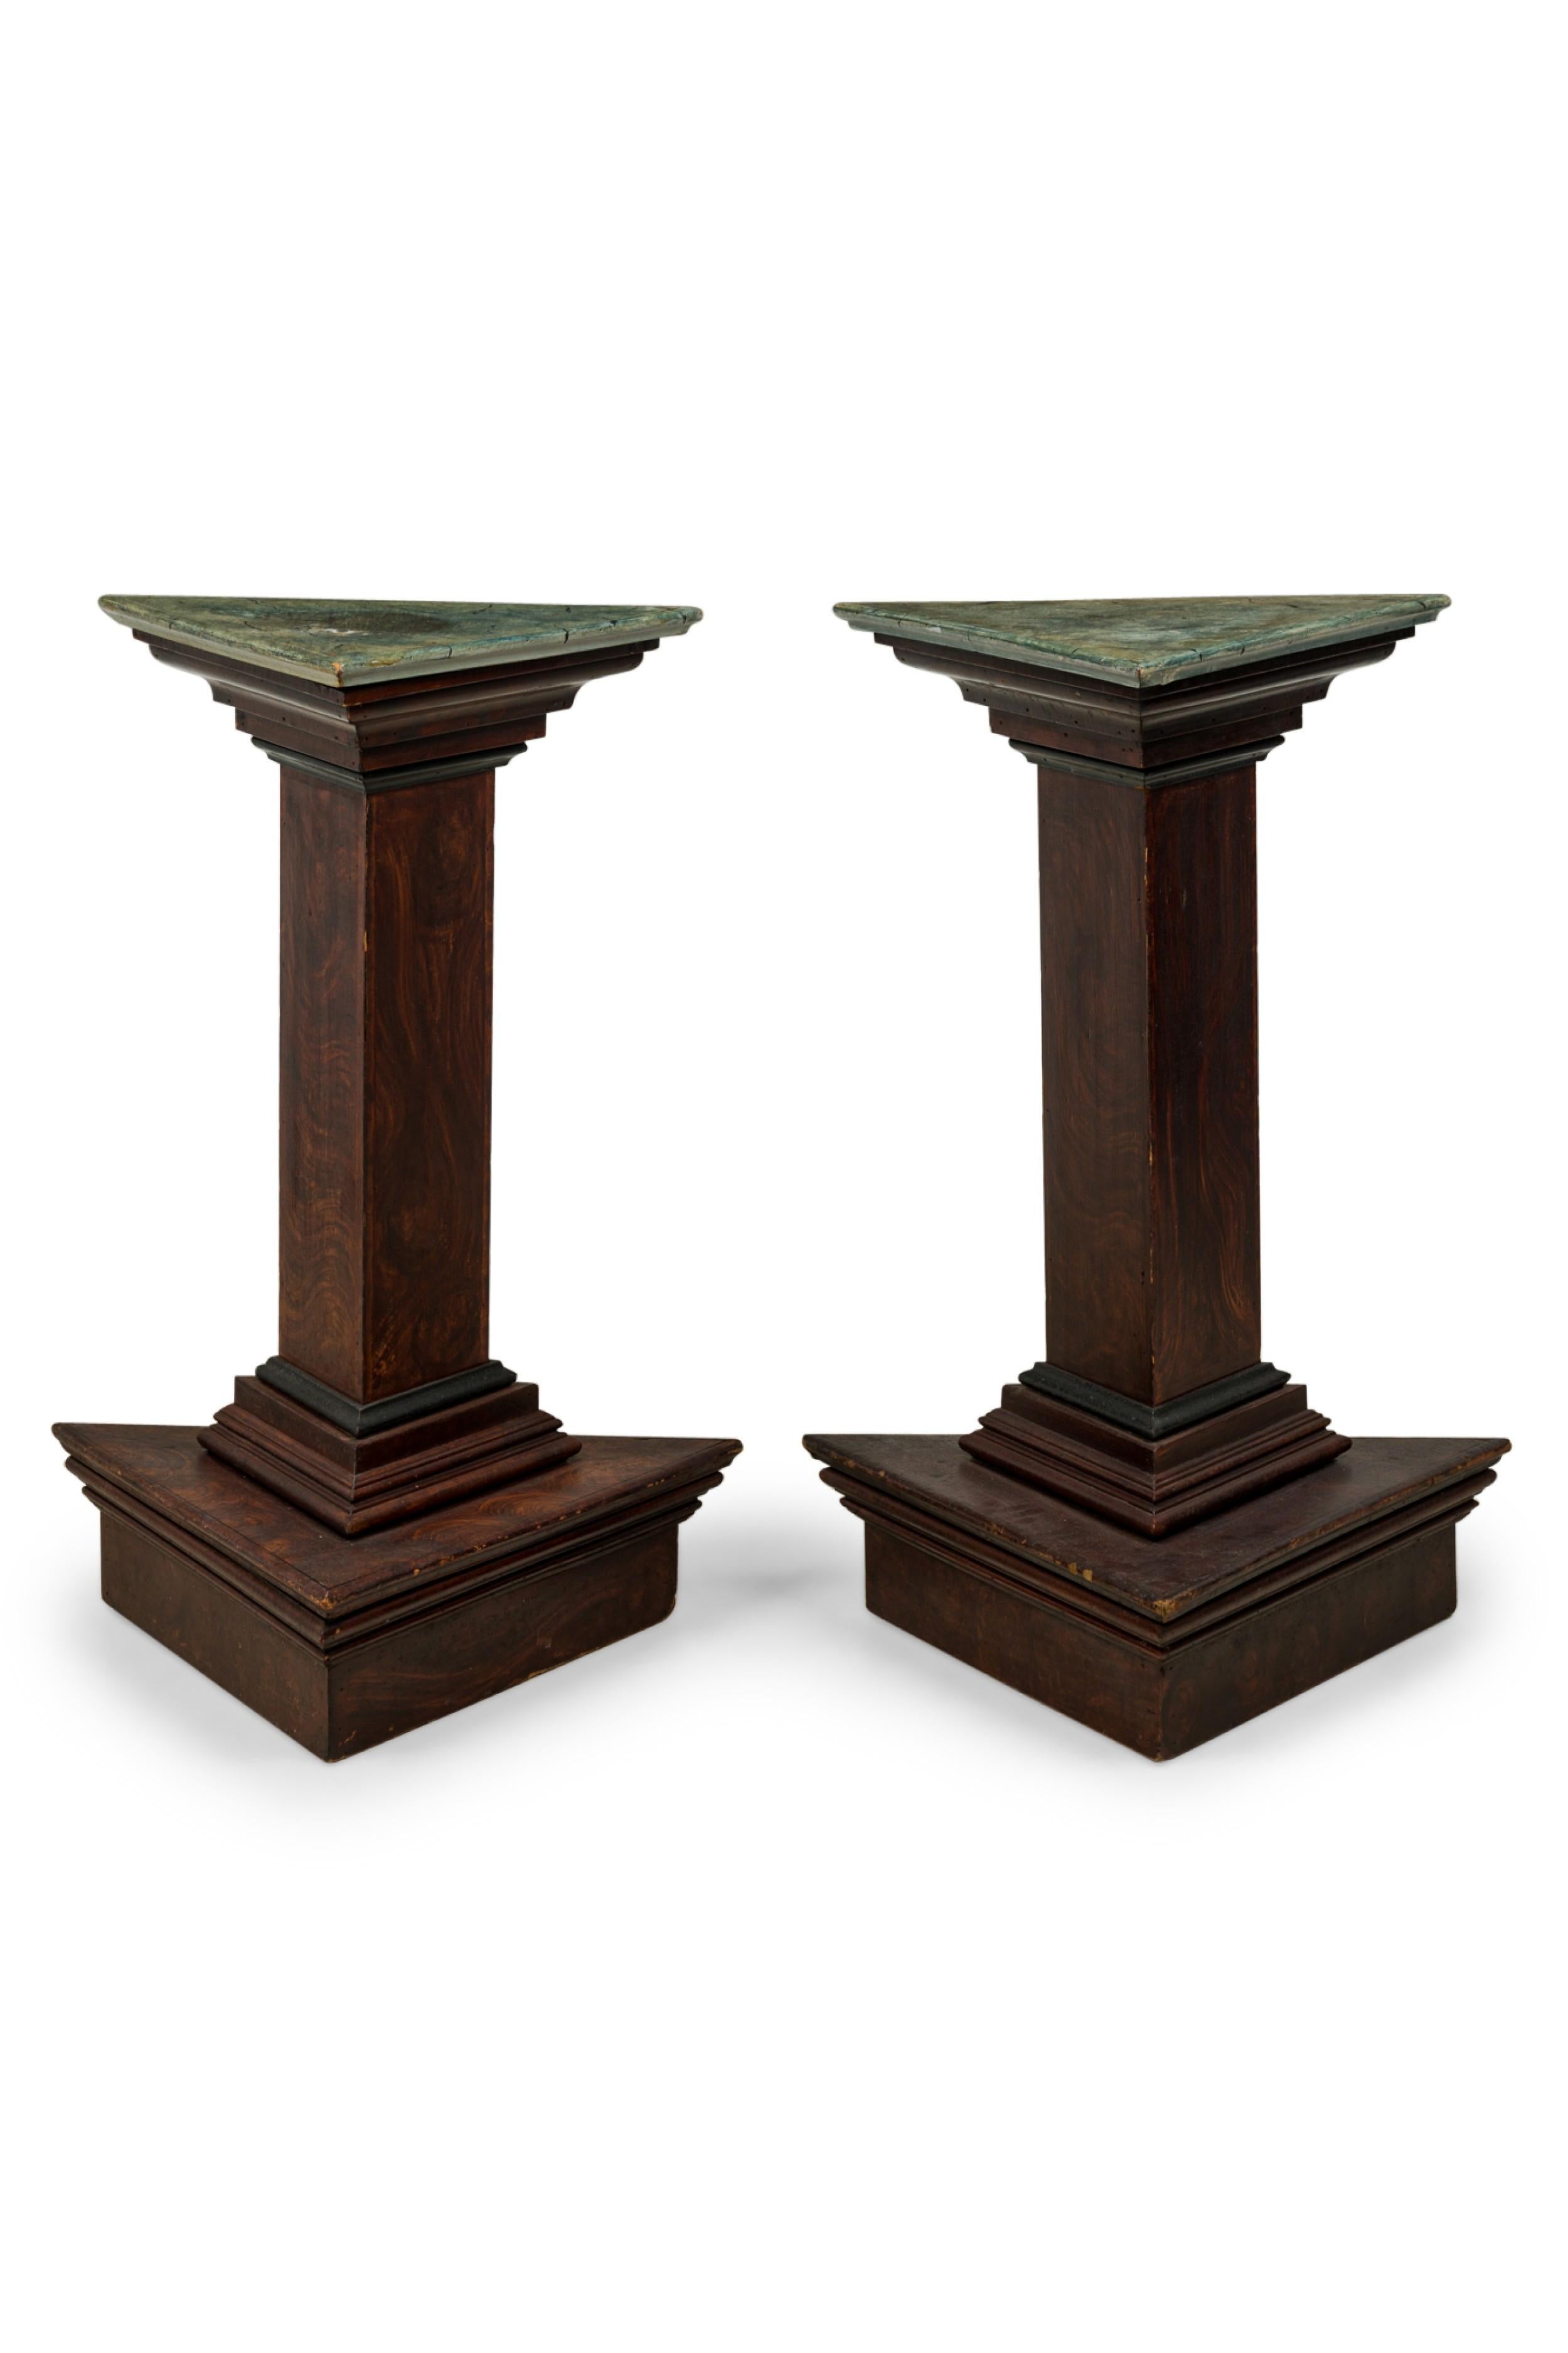 Pair of Italian Neoclassical Faux Bois and Faux Marble Painted Pedestals In Good Condition For Sale In New York, NY